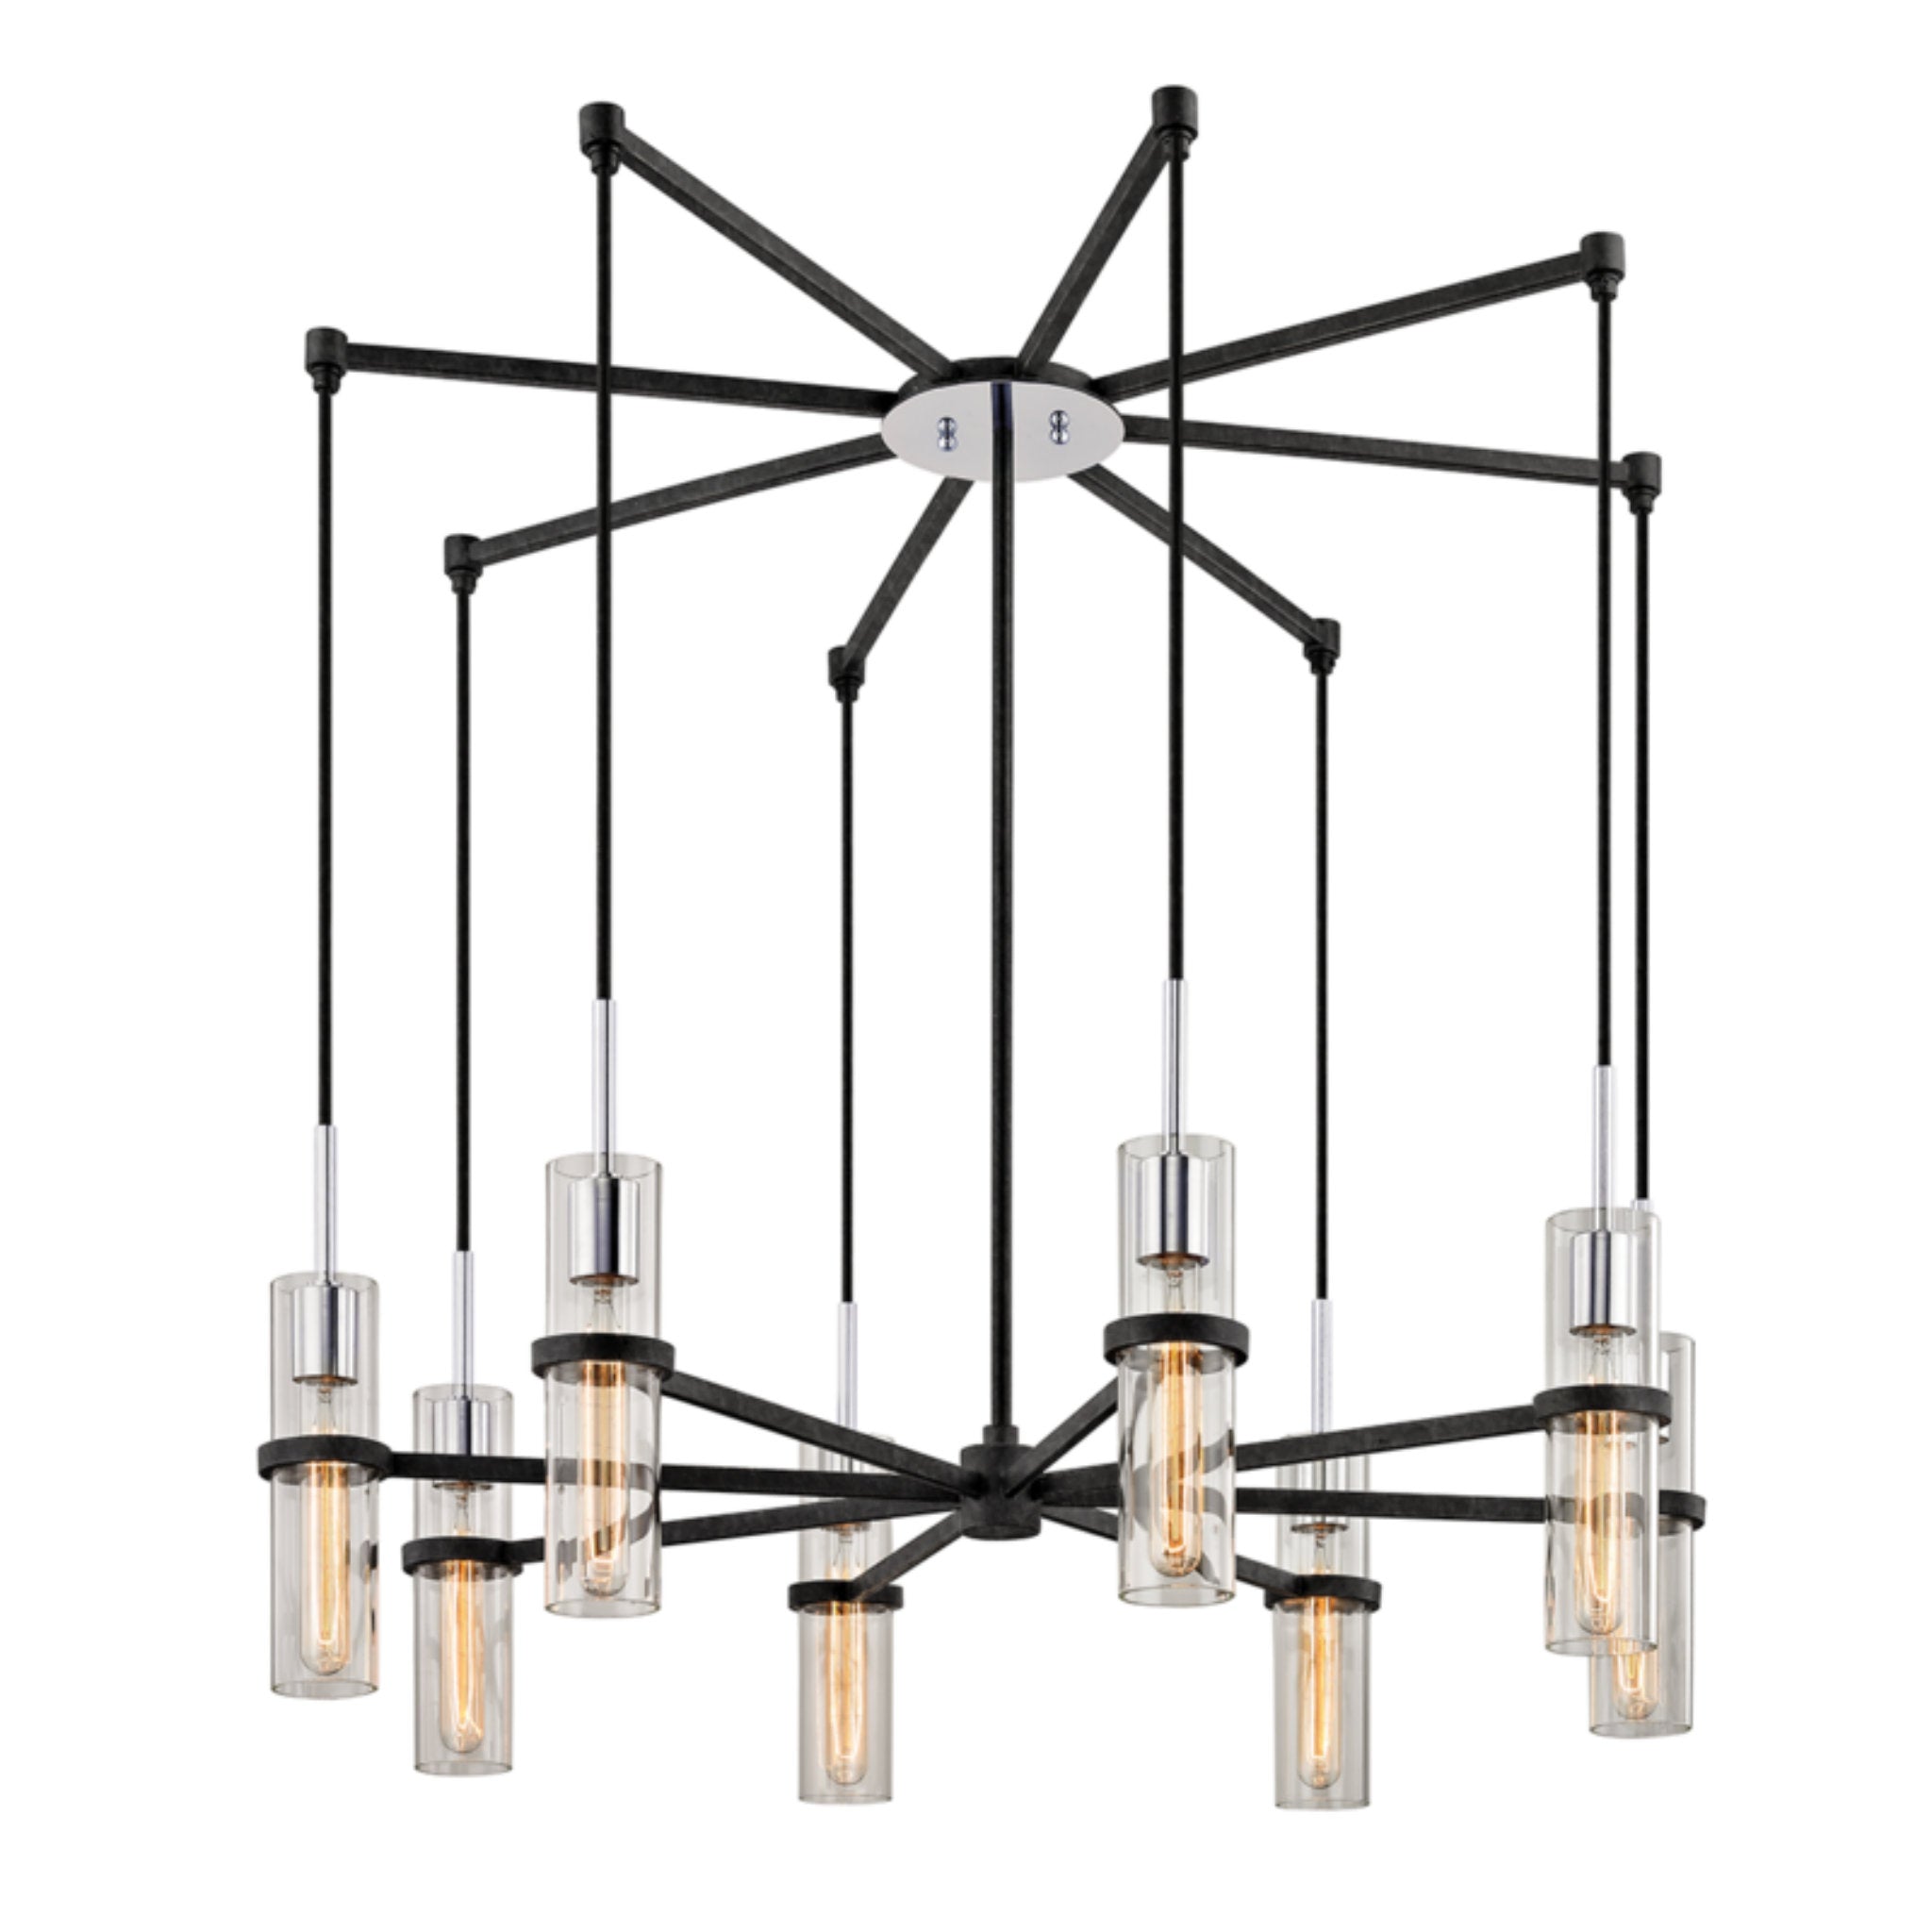 Xavier 8 Light Chandelier in Textured Iron/Polished Chrome